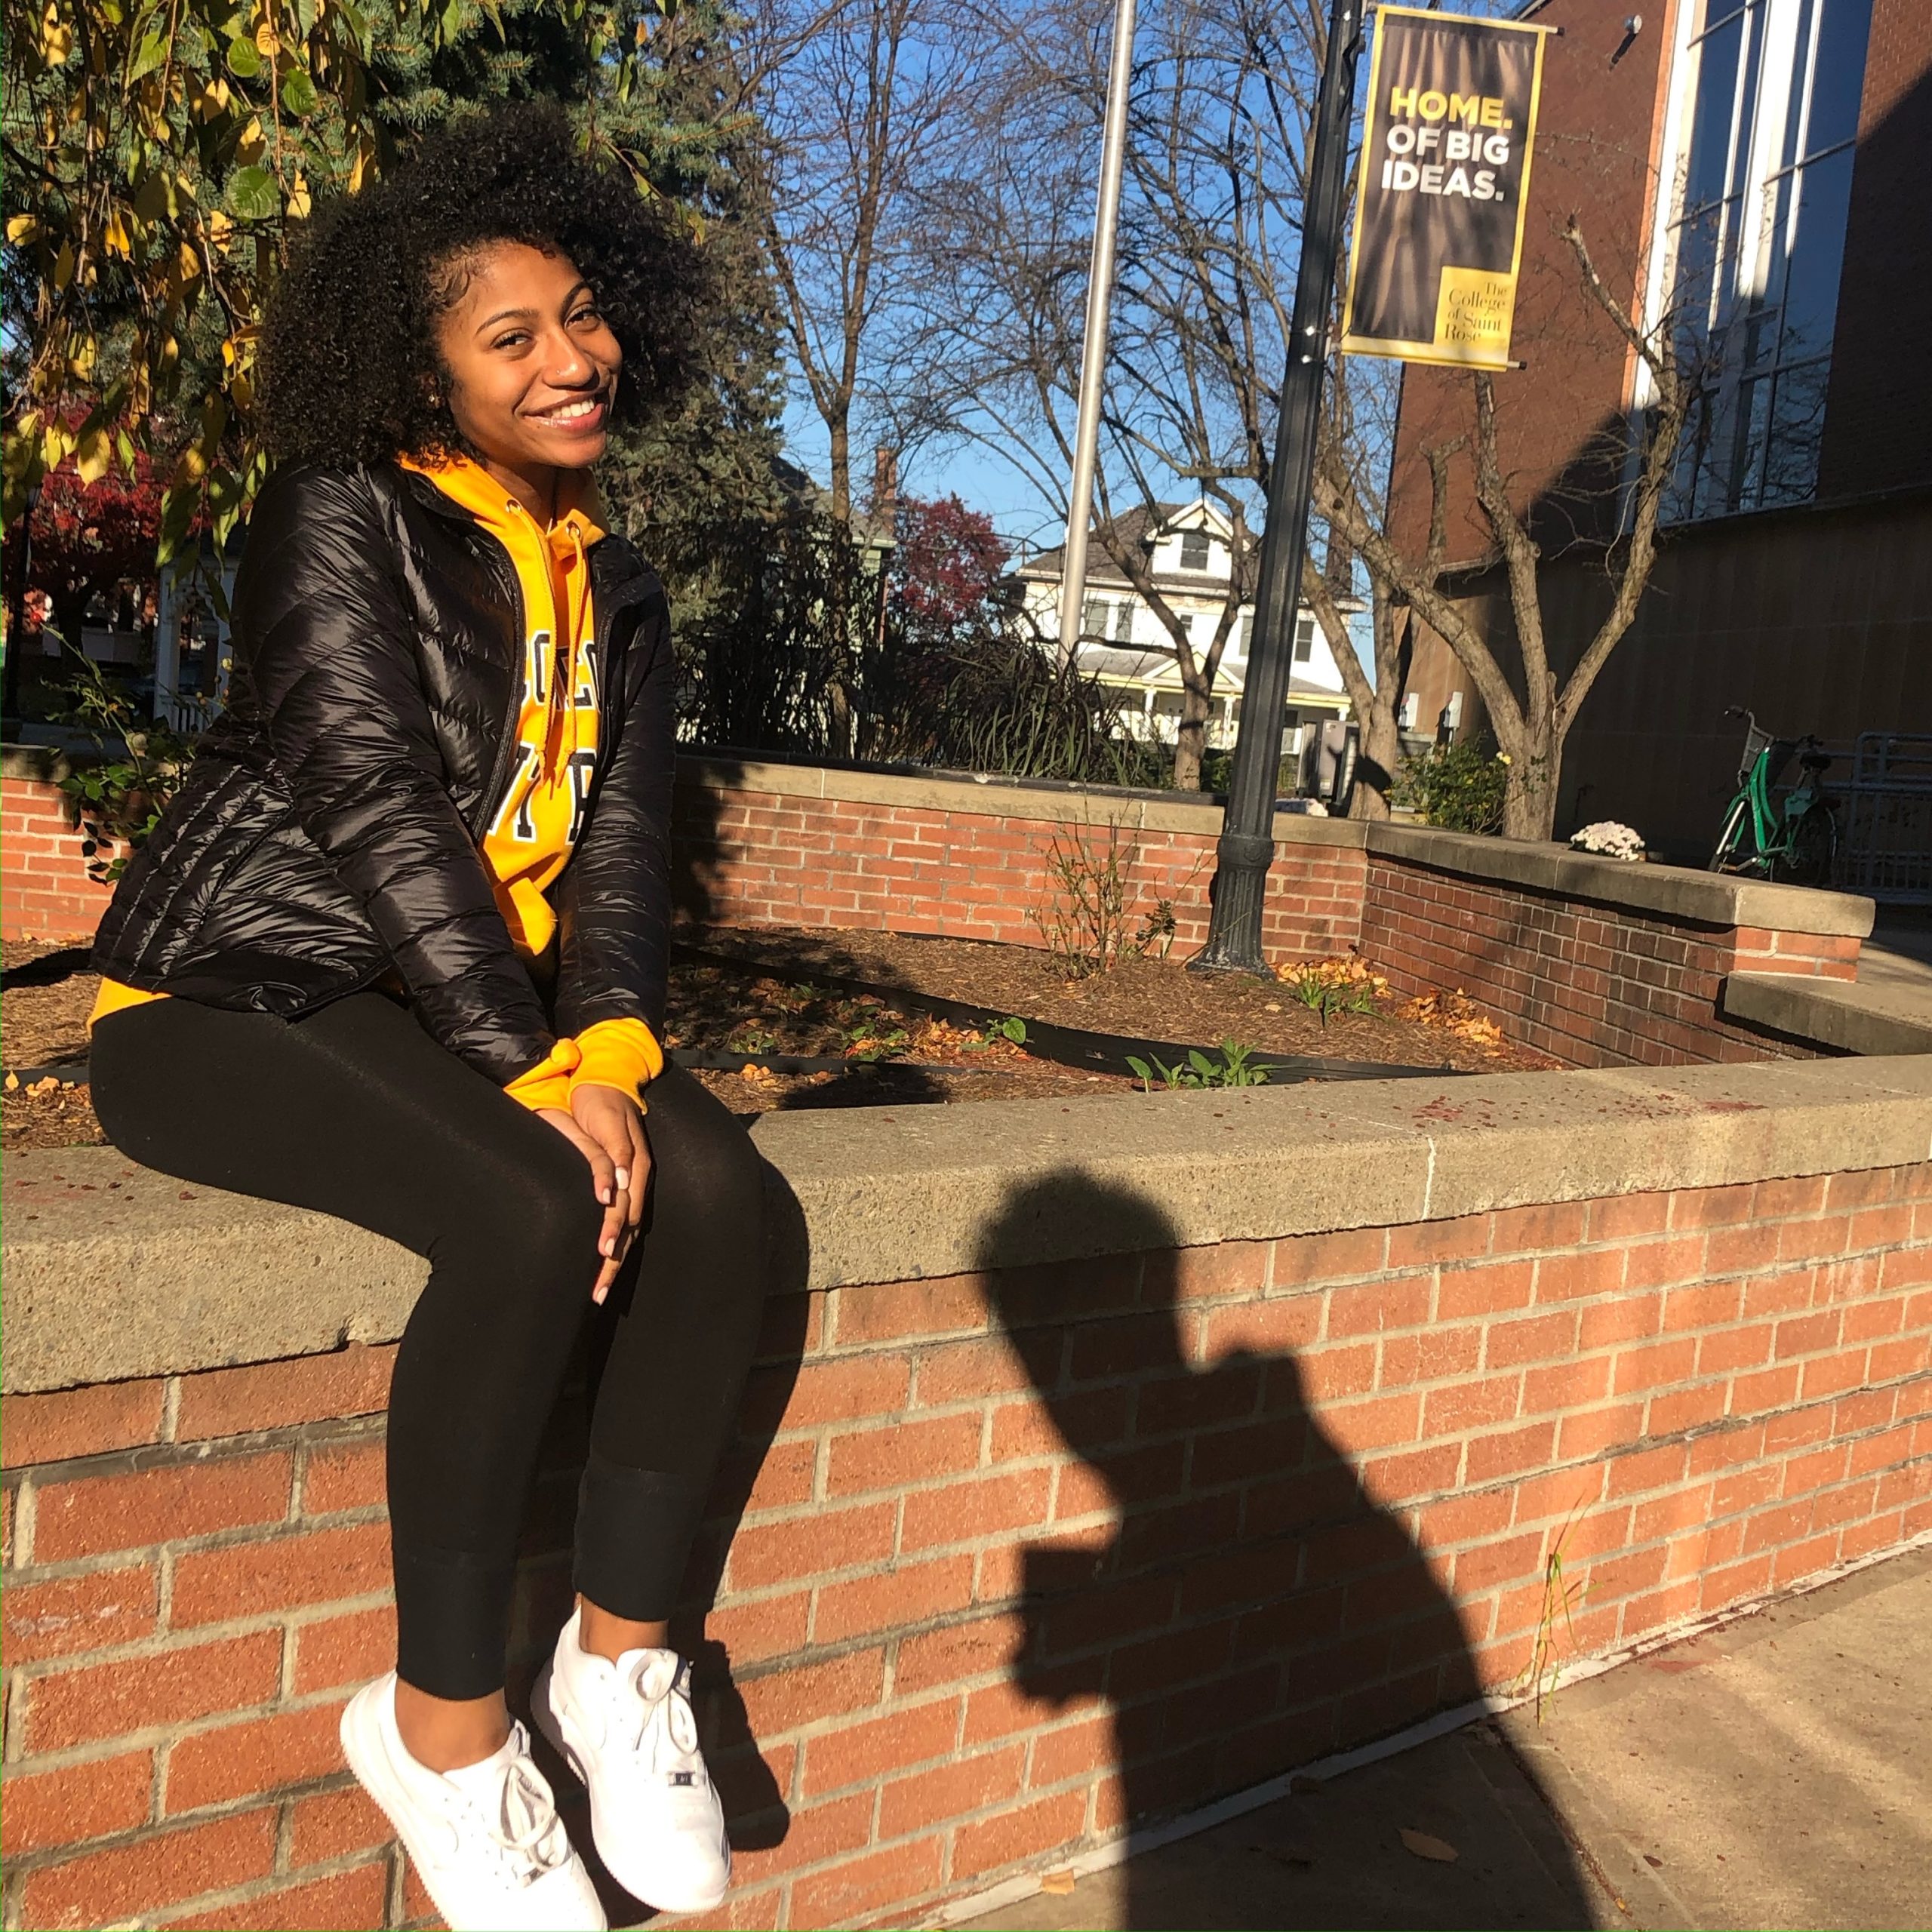 A female student sits on a brick half wall on the Saint Rose campus on a sunny day. She is smiling and wearing a Saint Rose sweatshirt under a black jacket.